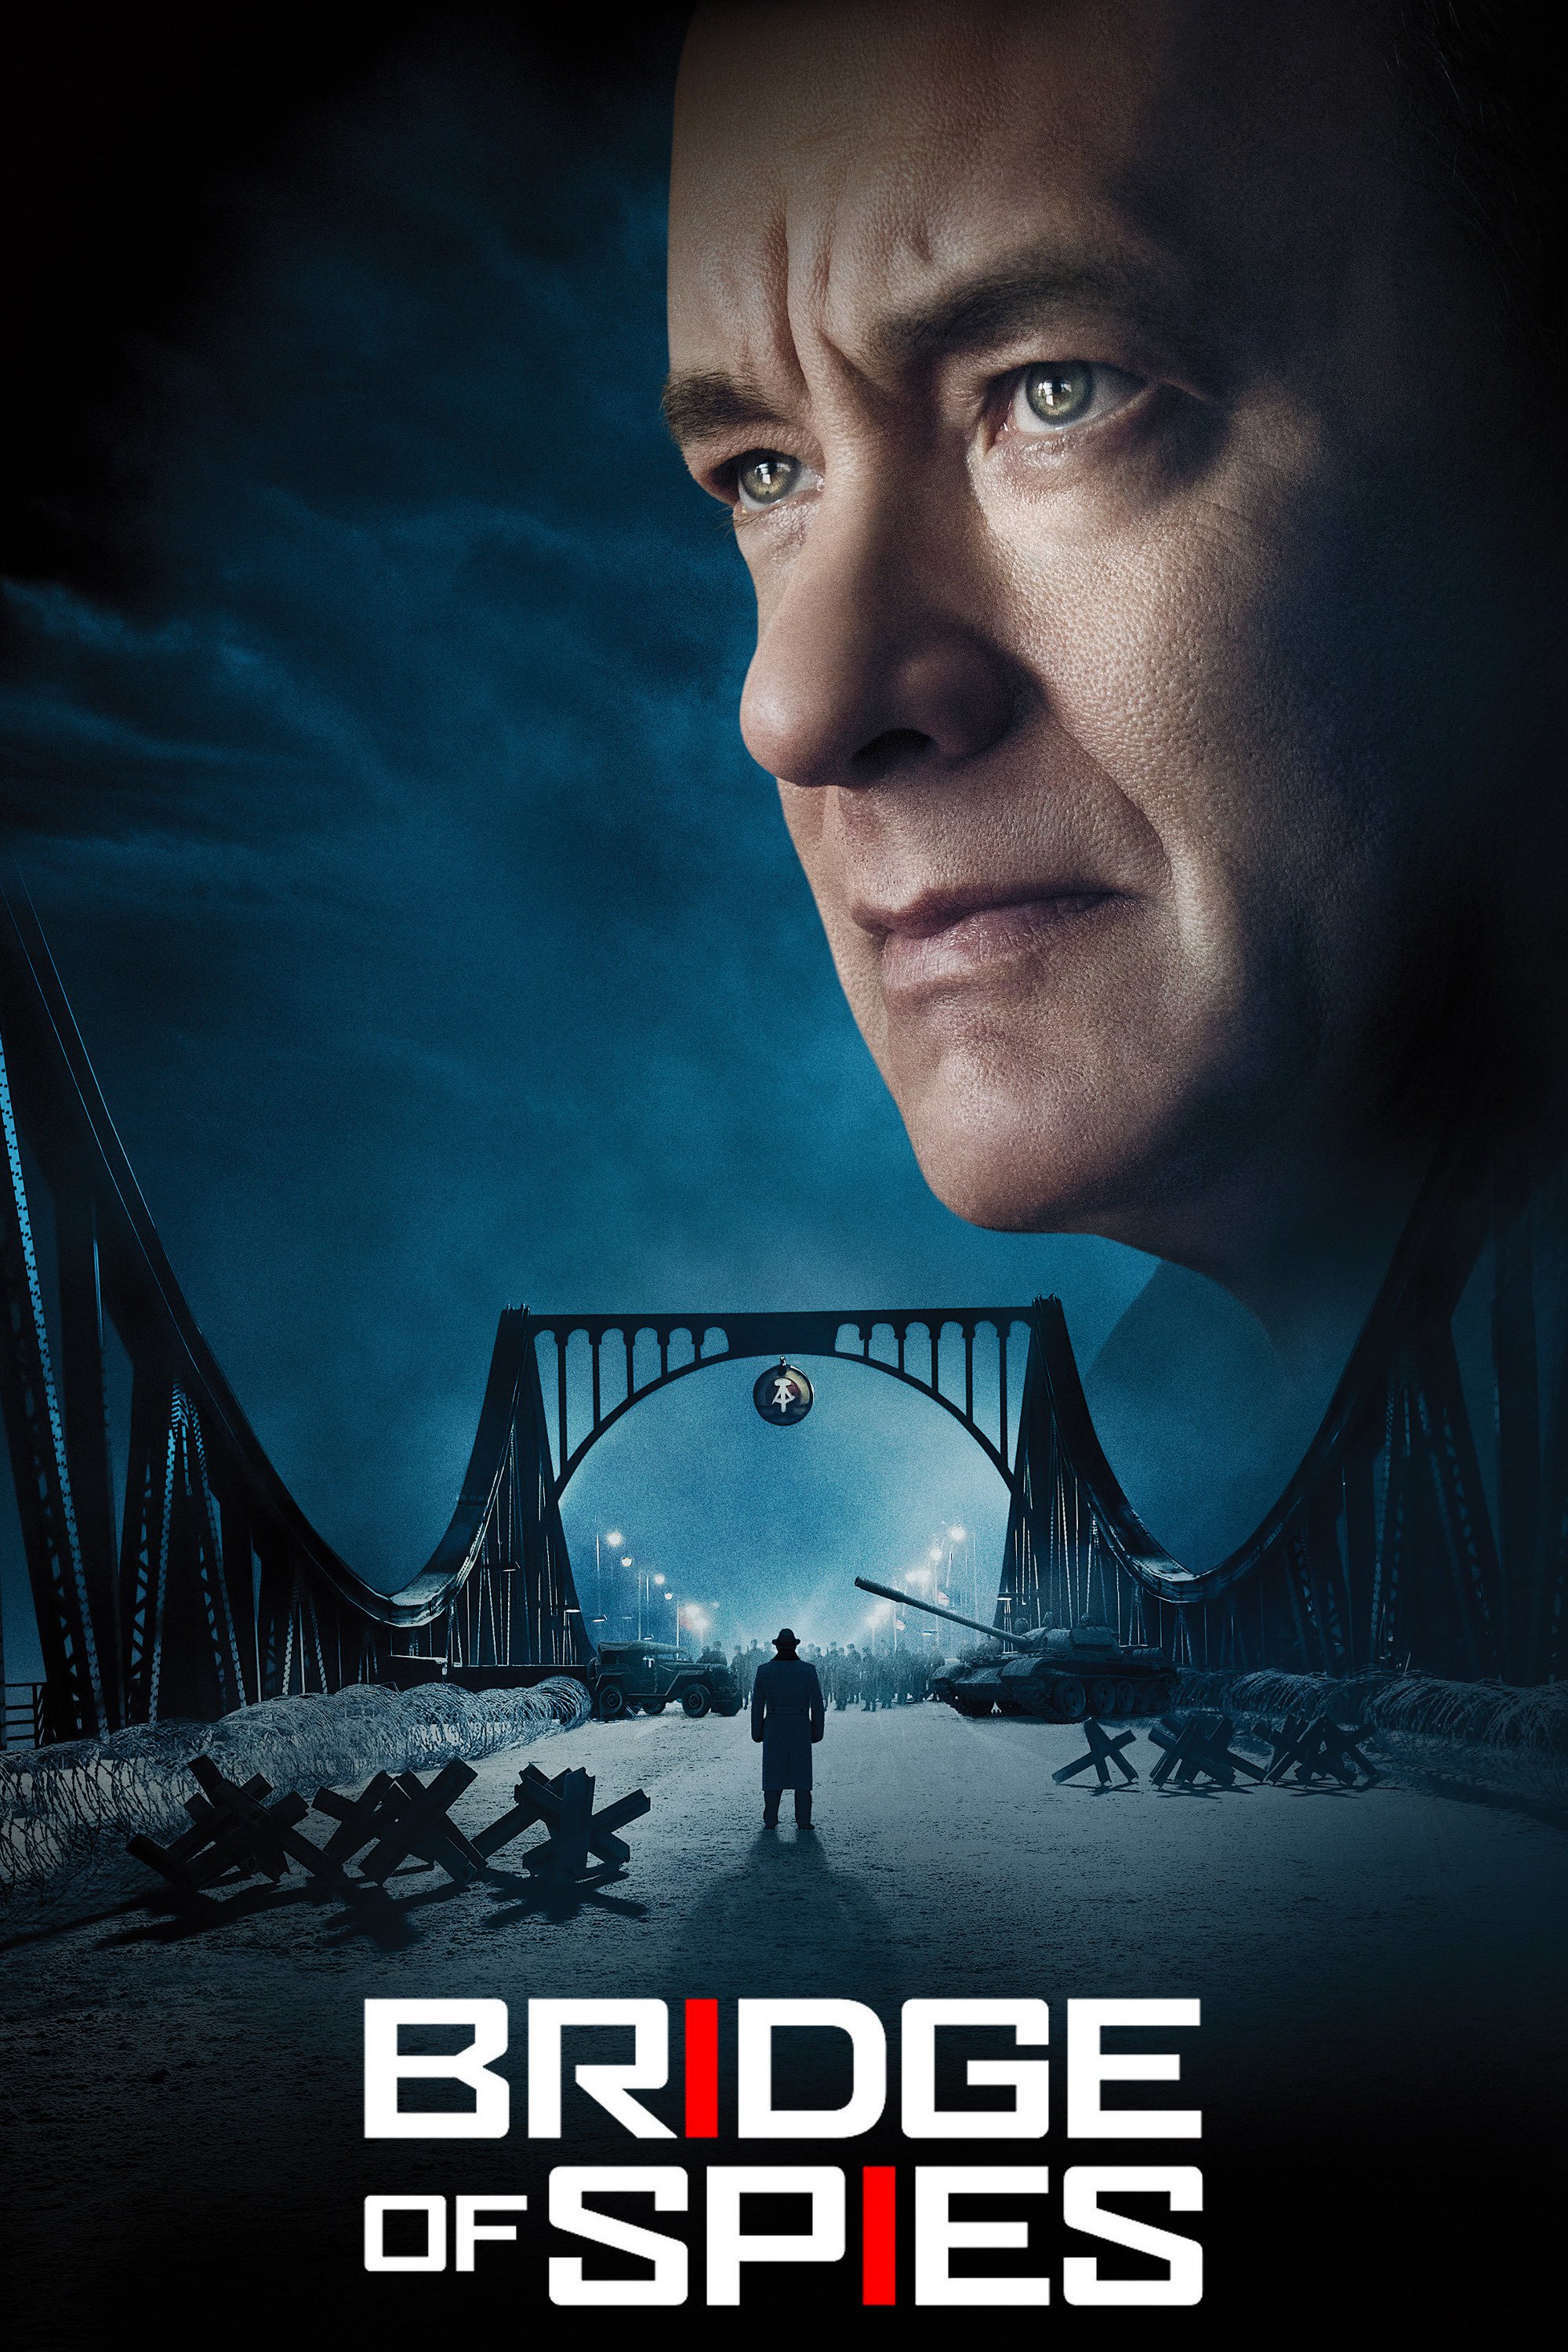 Poster for the movie "Bridge of Spies"